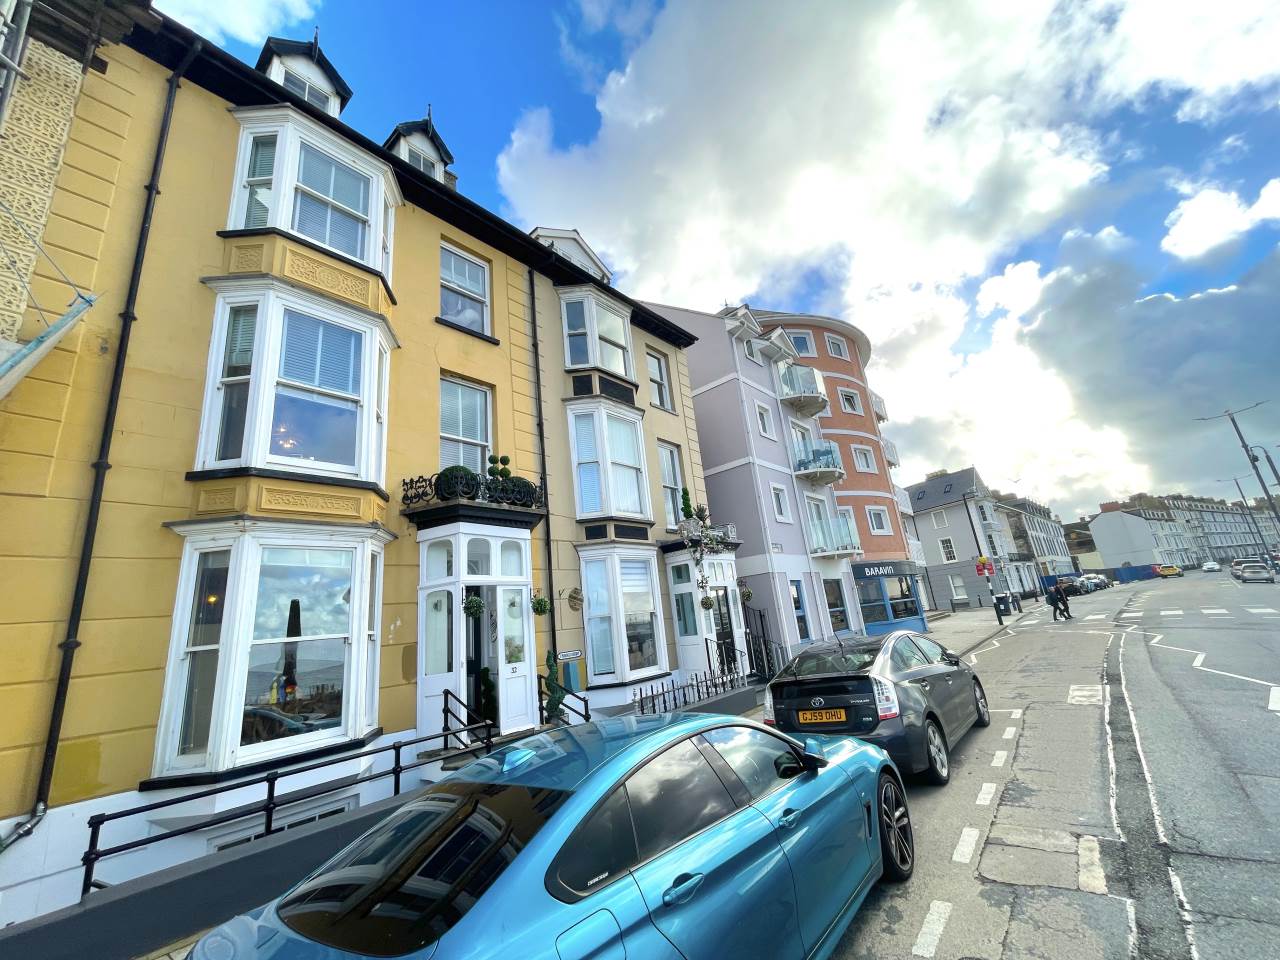 5 bed house for sale in Marine Terrace, Aberystwyth, SY23